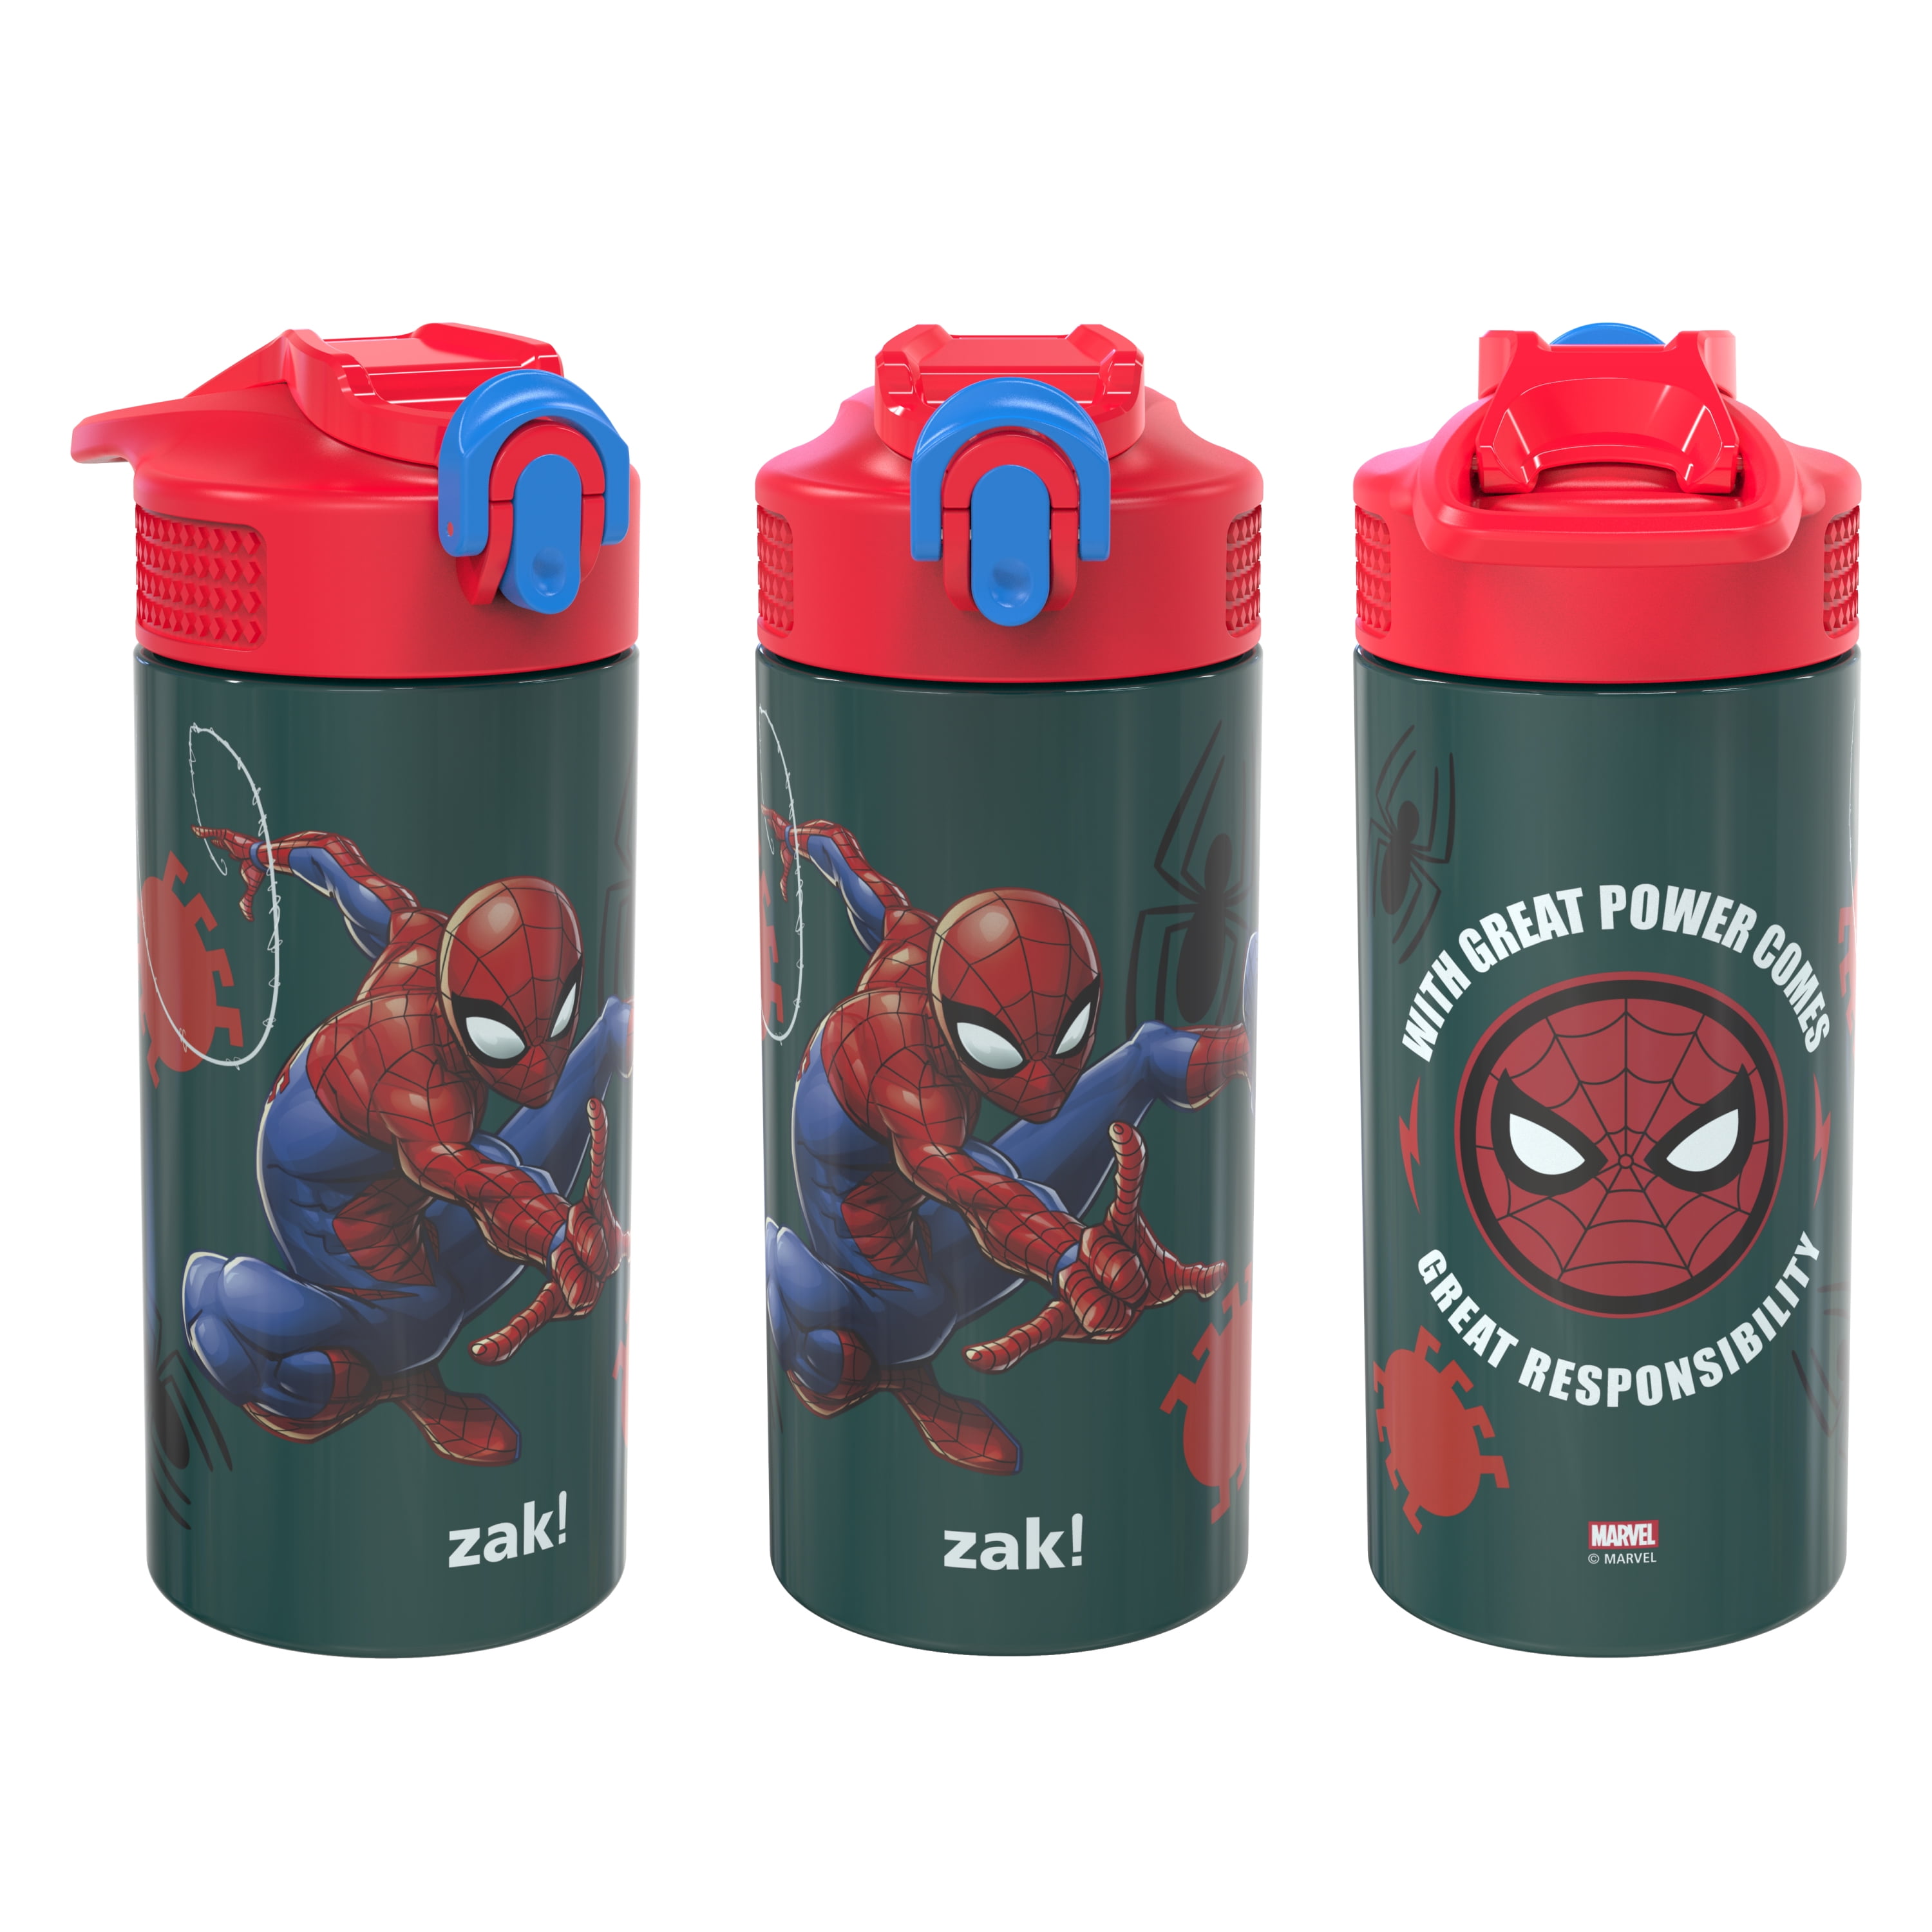 Spider-Man Miles Morales Geometric Logo THERMOS STAINLESS KING Stainless  Steel Drink Bottle, Vacuum insulated & Double Wall, 24oz 